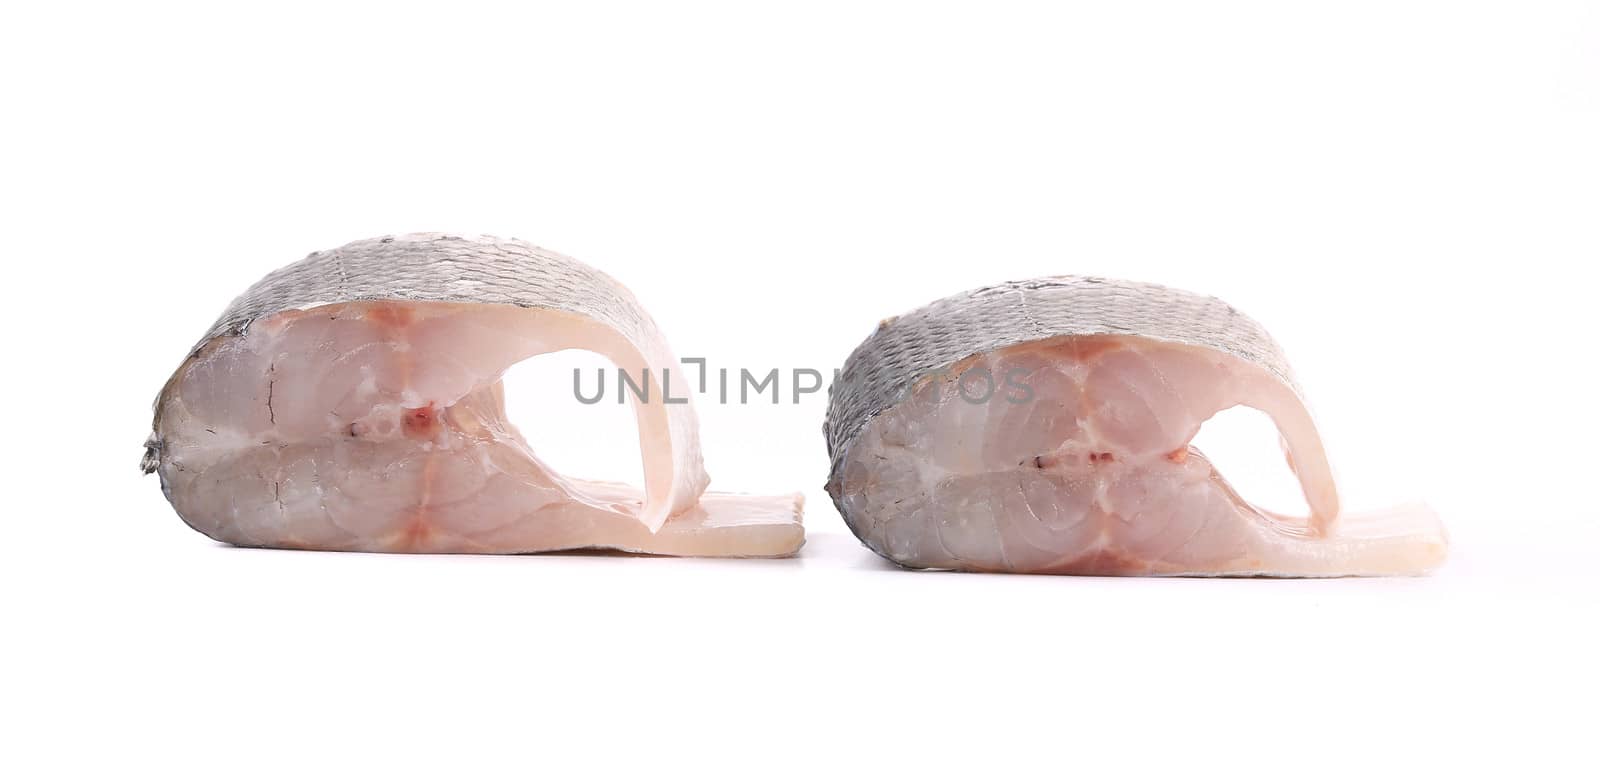 two fresh steaks of seabass. Isolated on a white background.